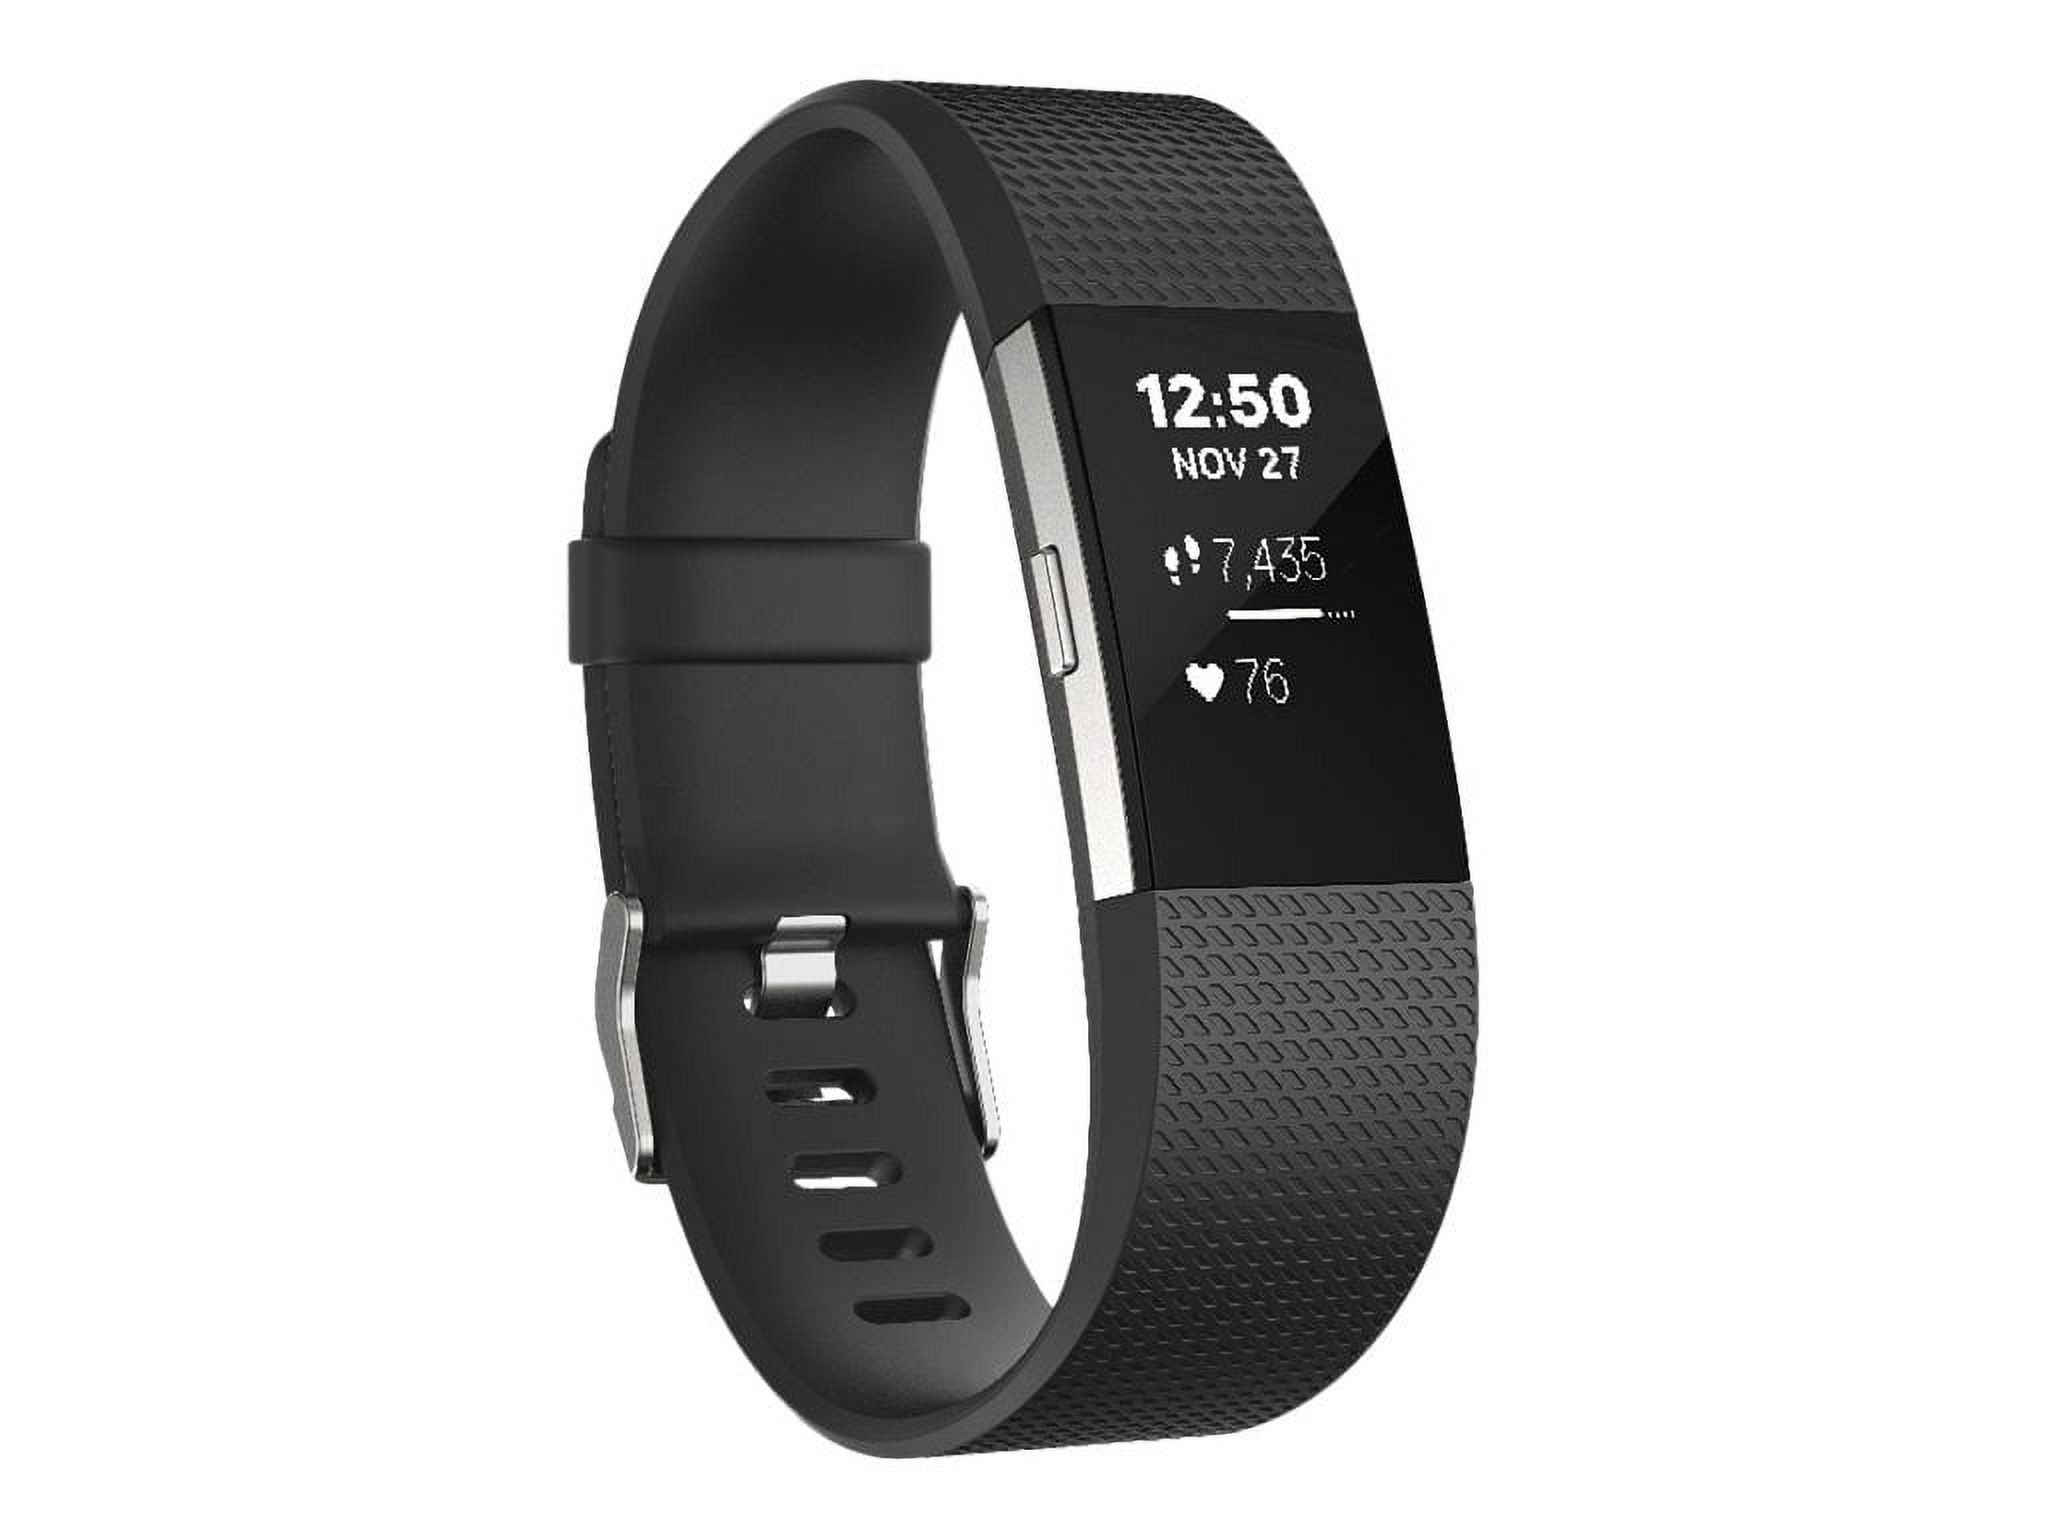 Fitbit Charge 2, Silver, Activity Tracker with Band, Black, Large, Monochrome, Bluetooth, 1.23 Oz, Silver - image 3 of 7